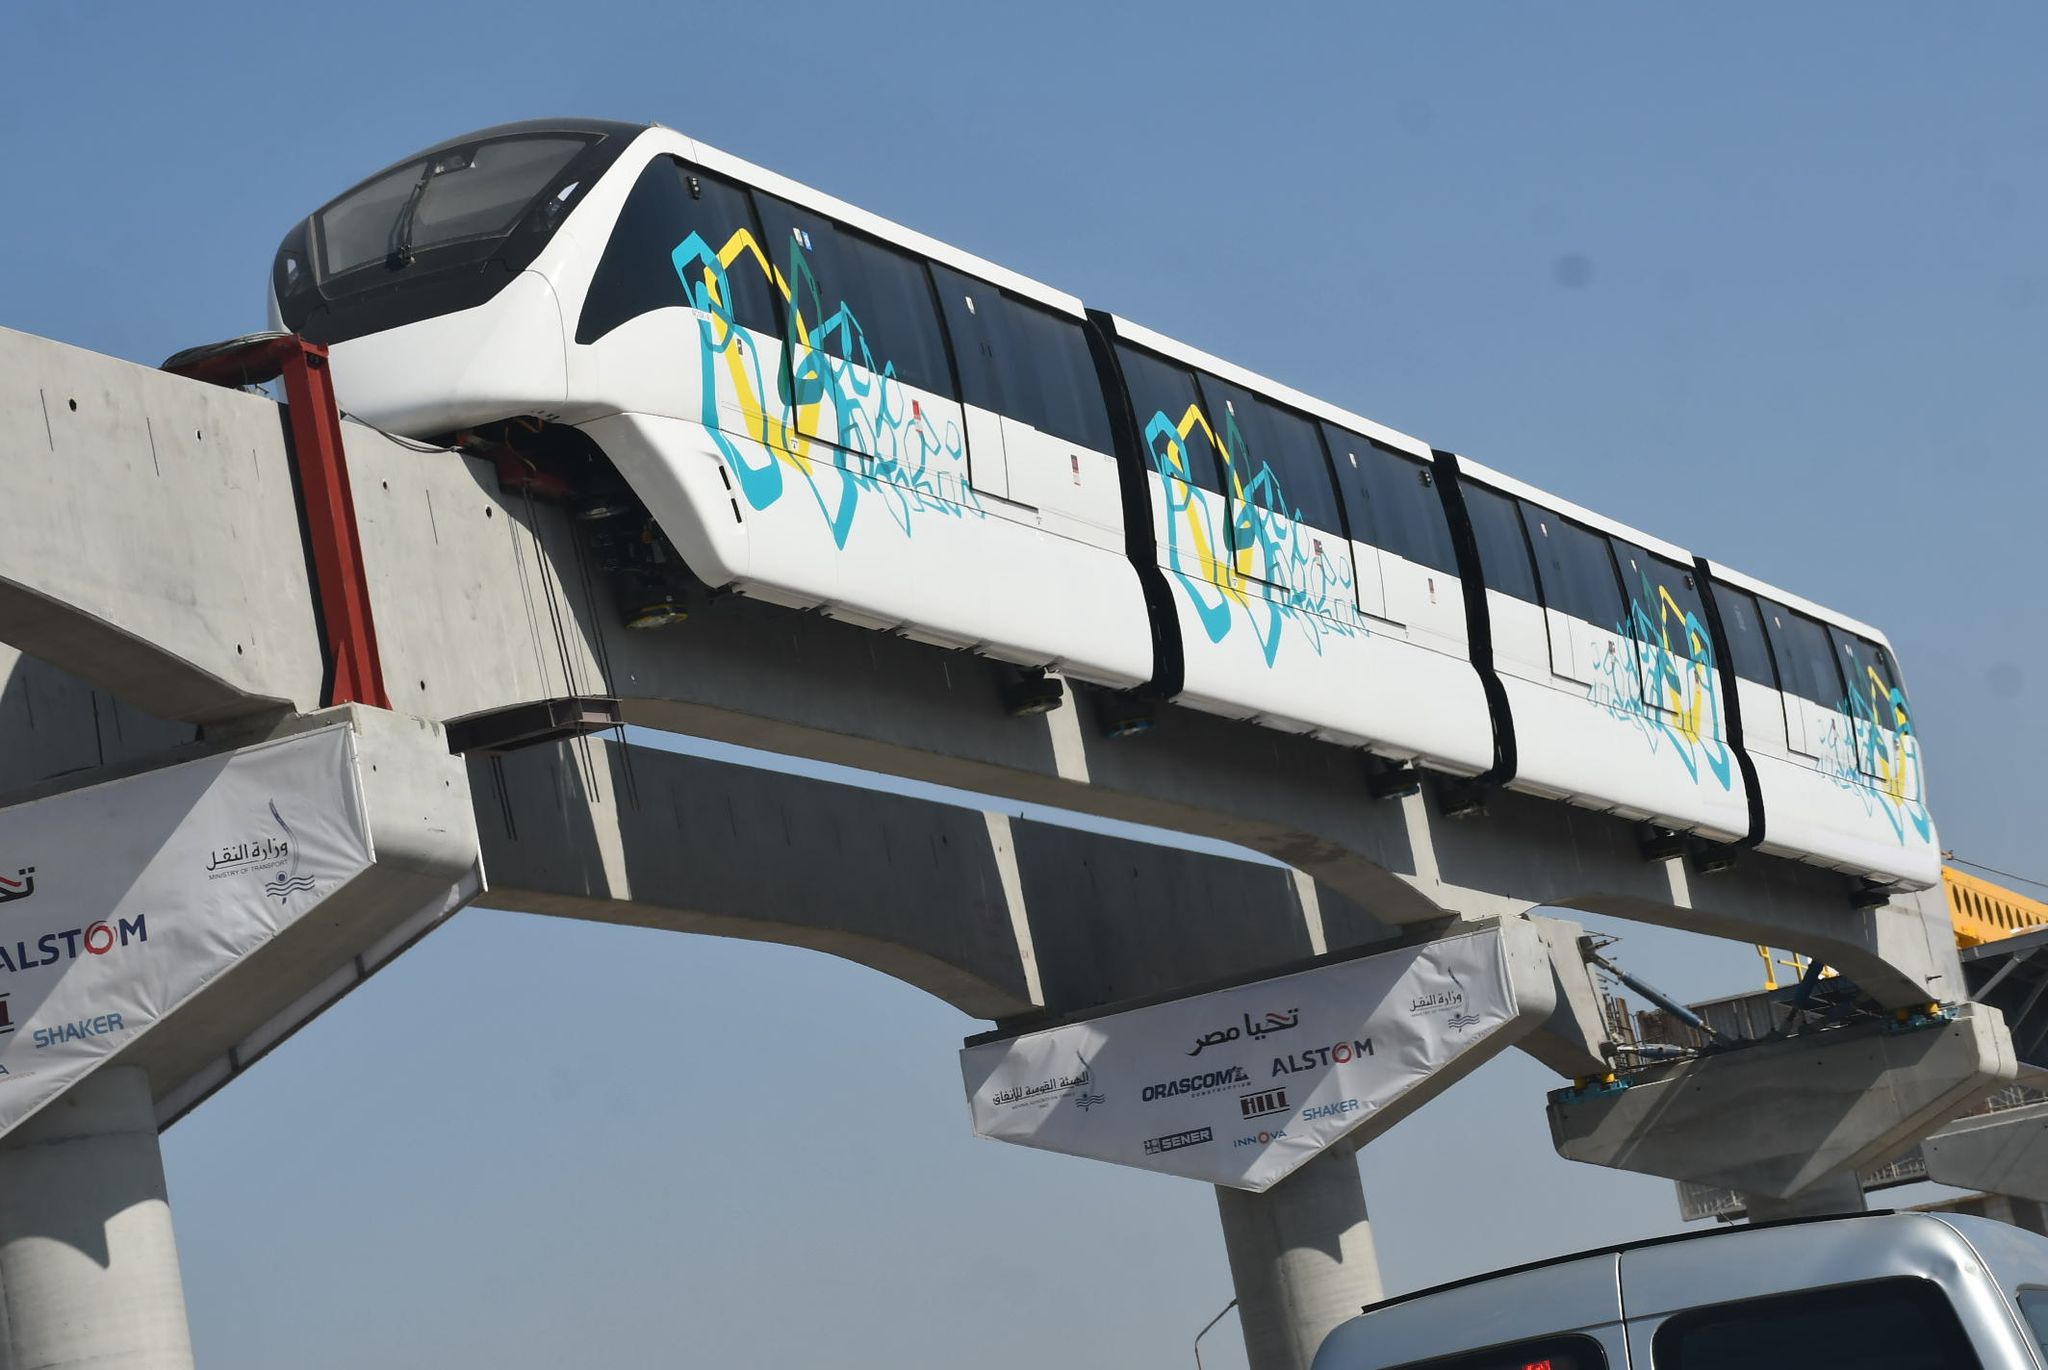 Transportation: “Monorail” represents a major cultural shift in fast, modern and safe mass transportation.